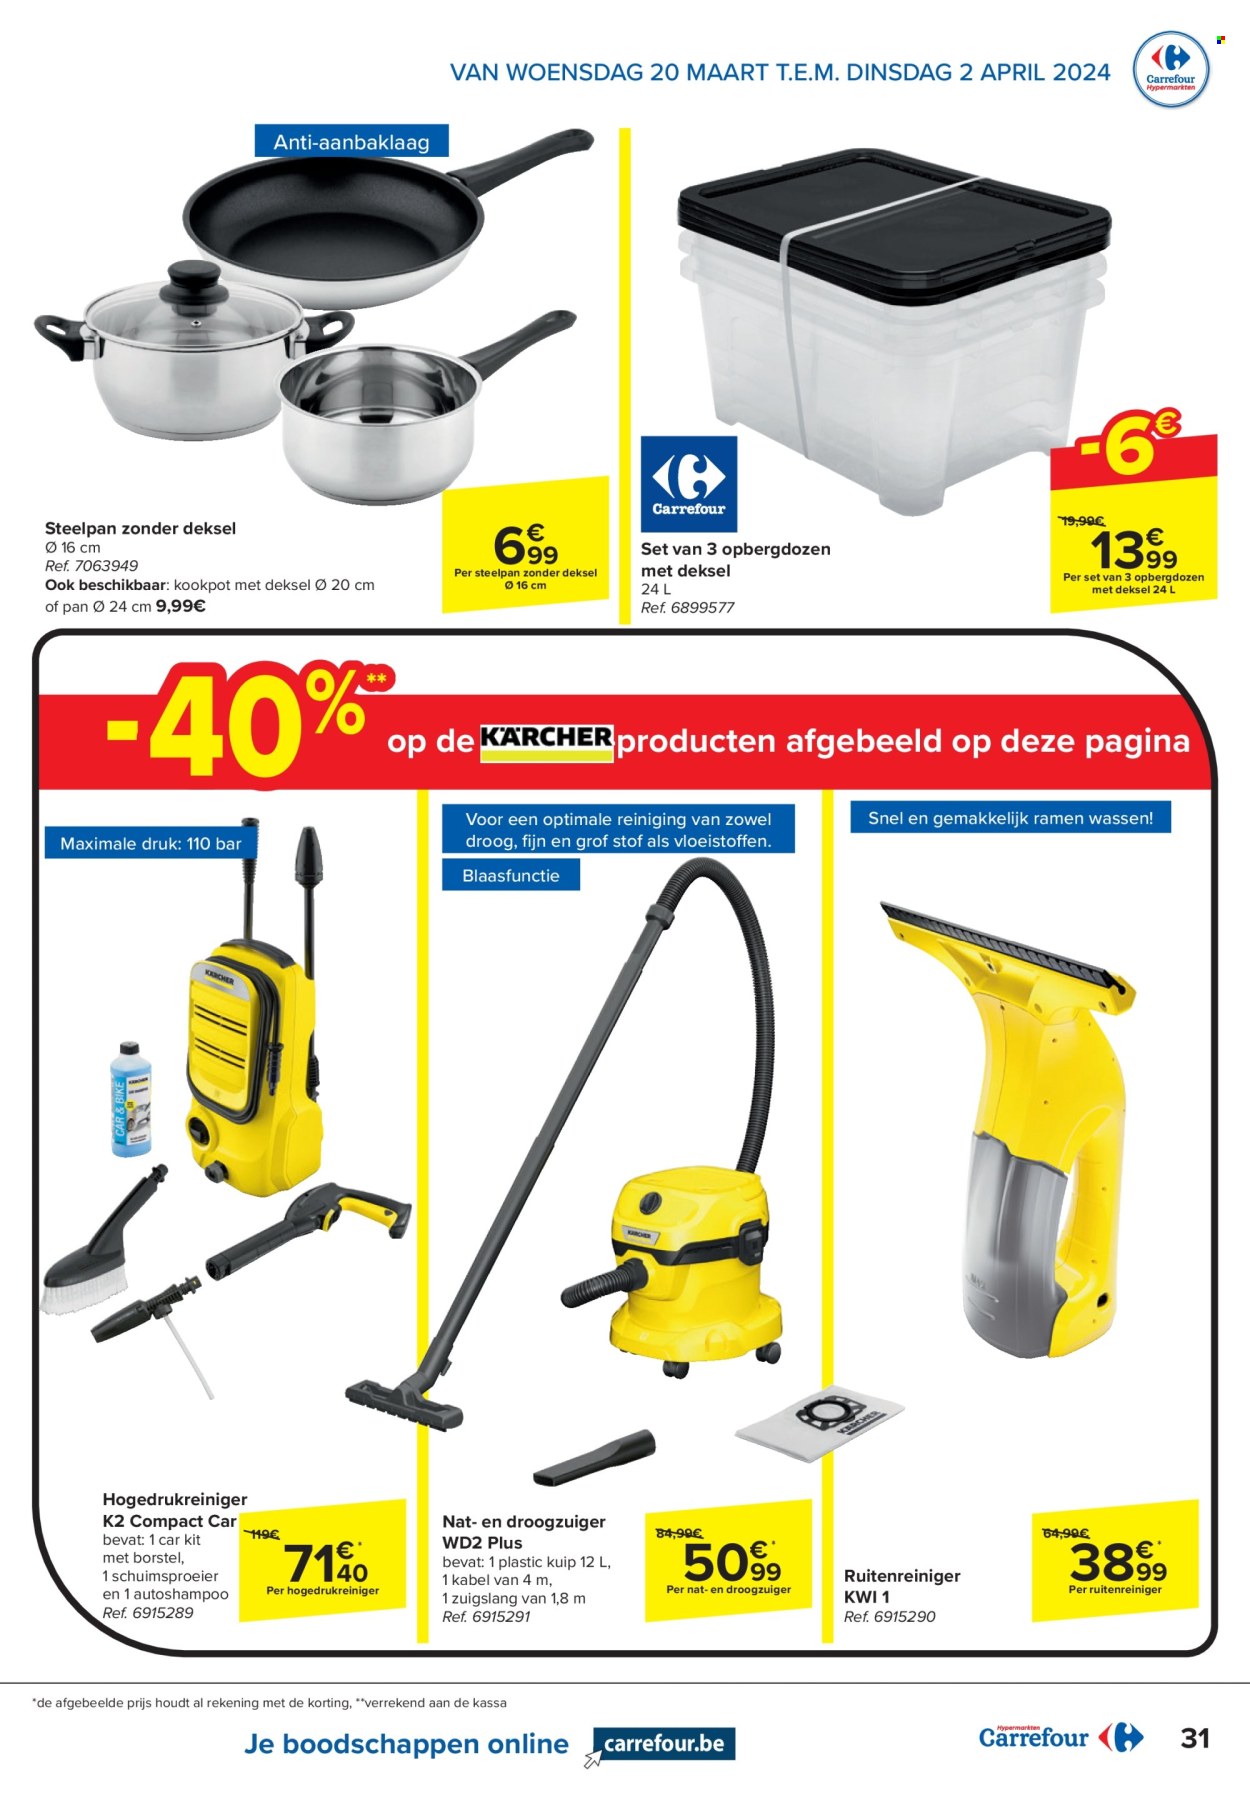 Catalogue Carrefour hypermarkt - 20.3.2024 - 2.4.2024. Page 31.